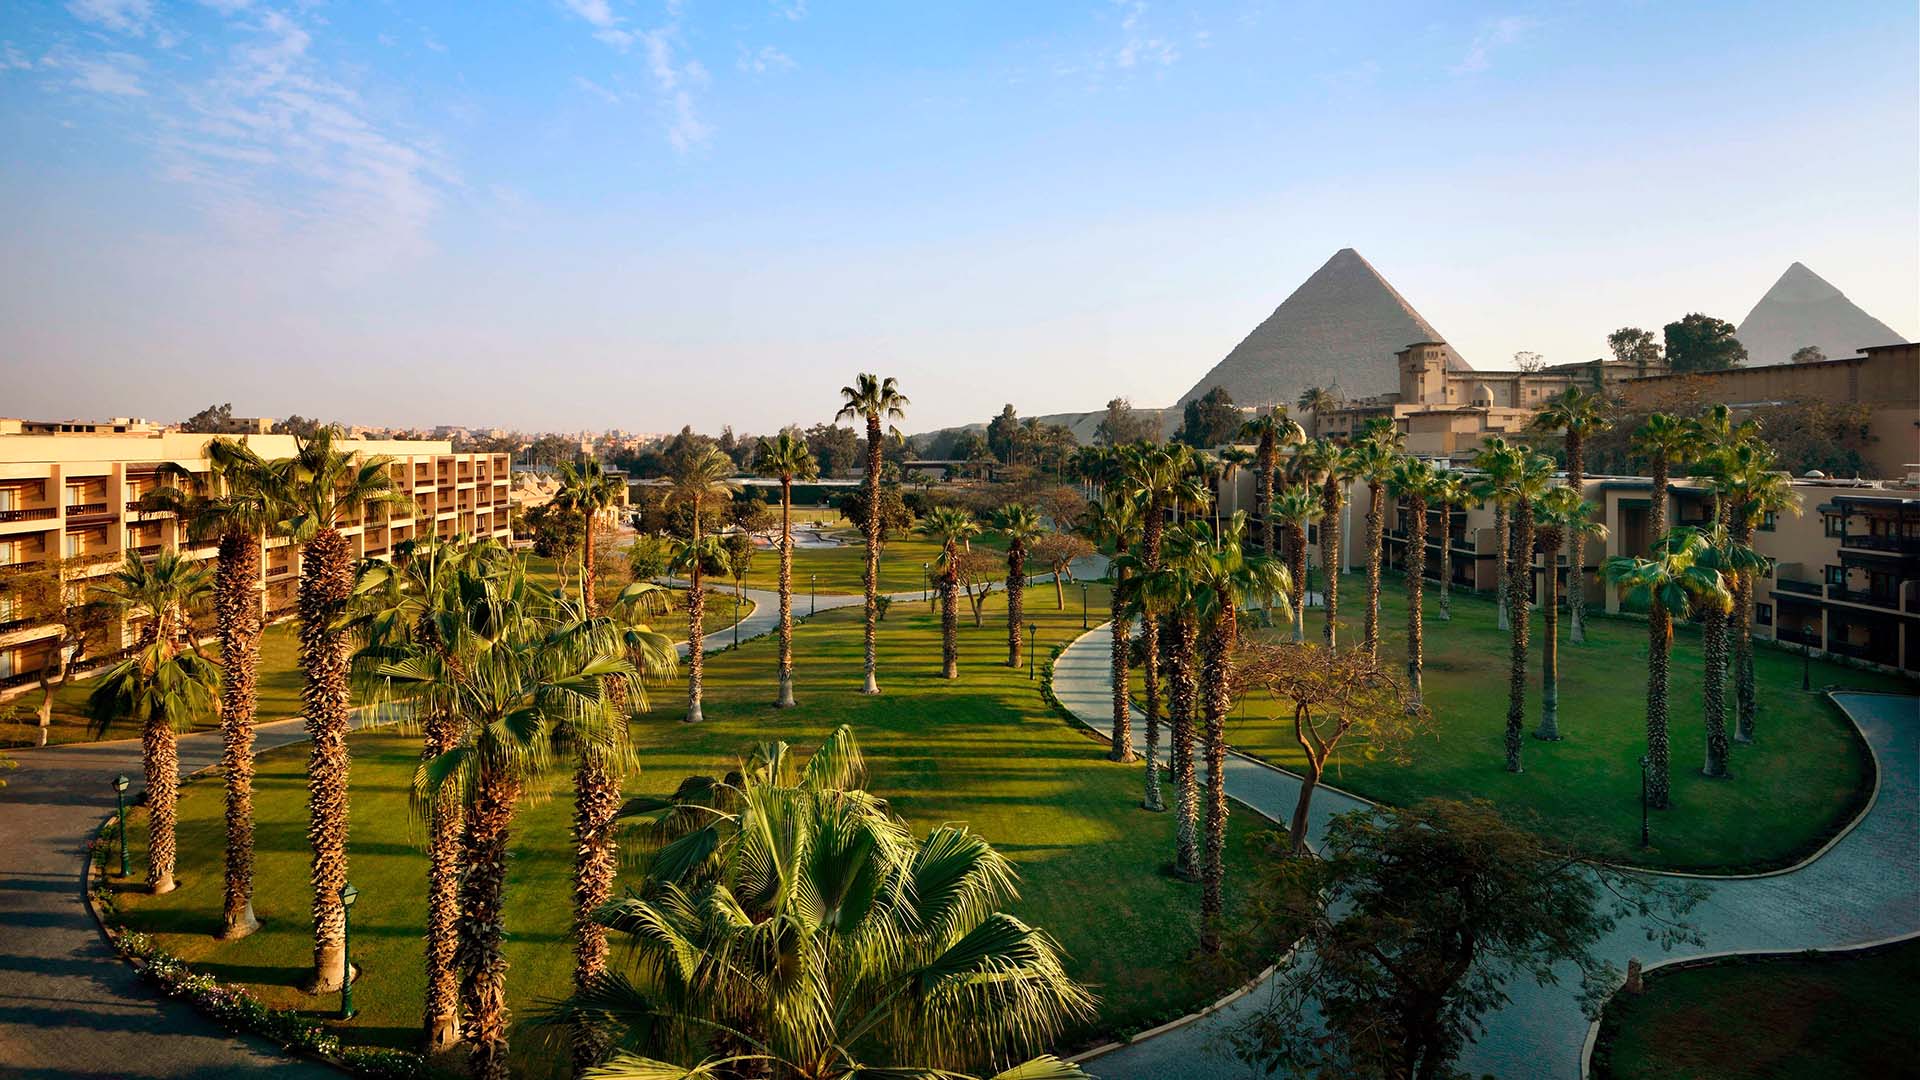 aerial view of Marriott Mena House, Cairo with the Pyramids of Giza in the background